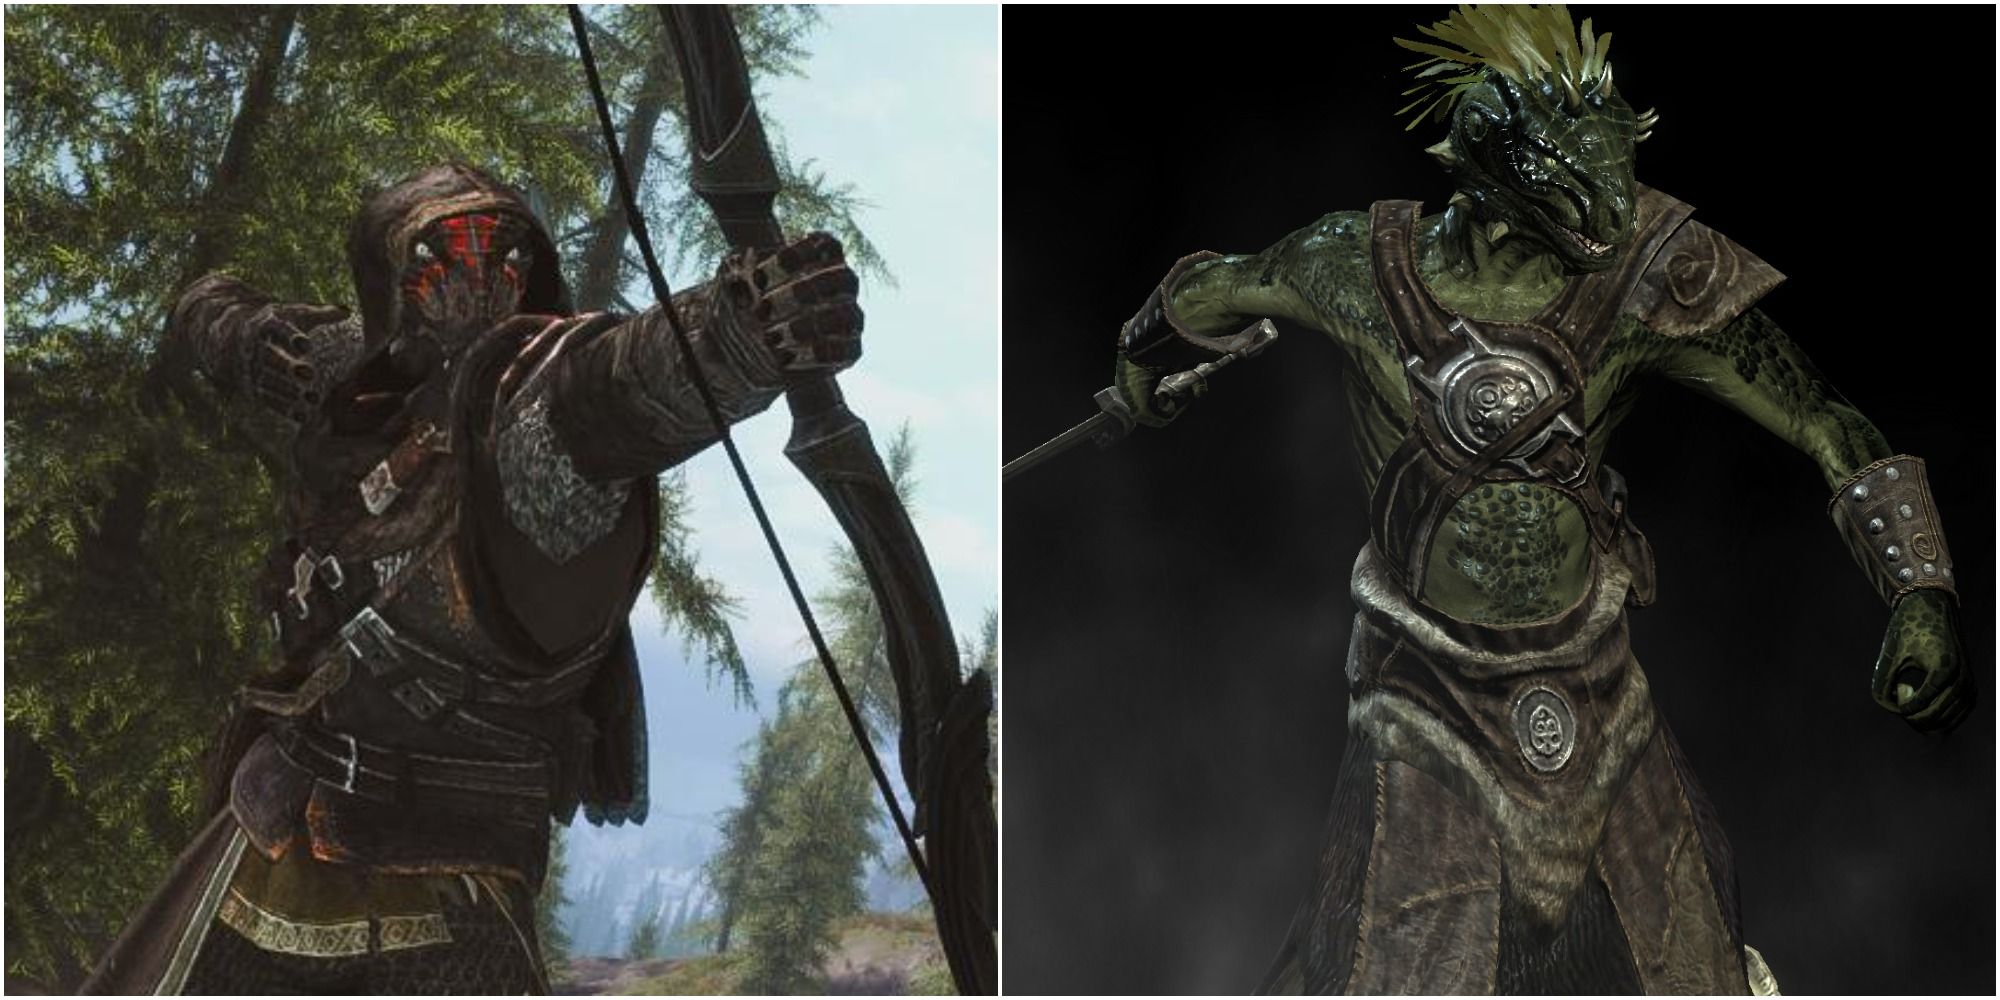 Anyone wish we could get argonian armor from eso into Skyrim or something  similar : r/skyrim